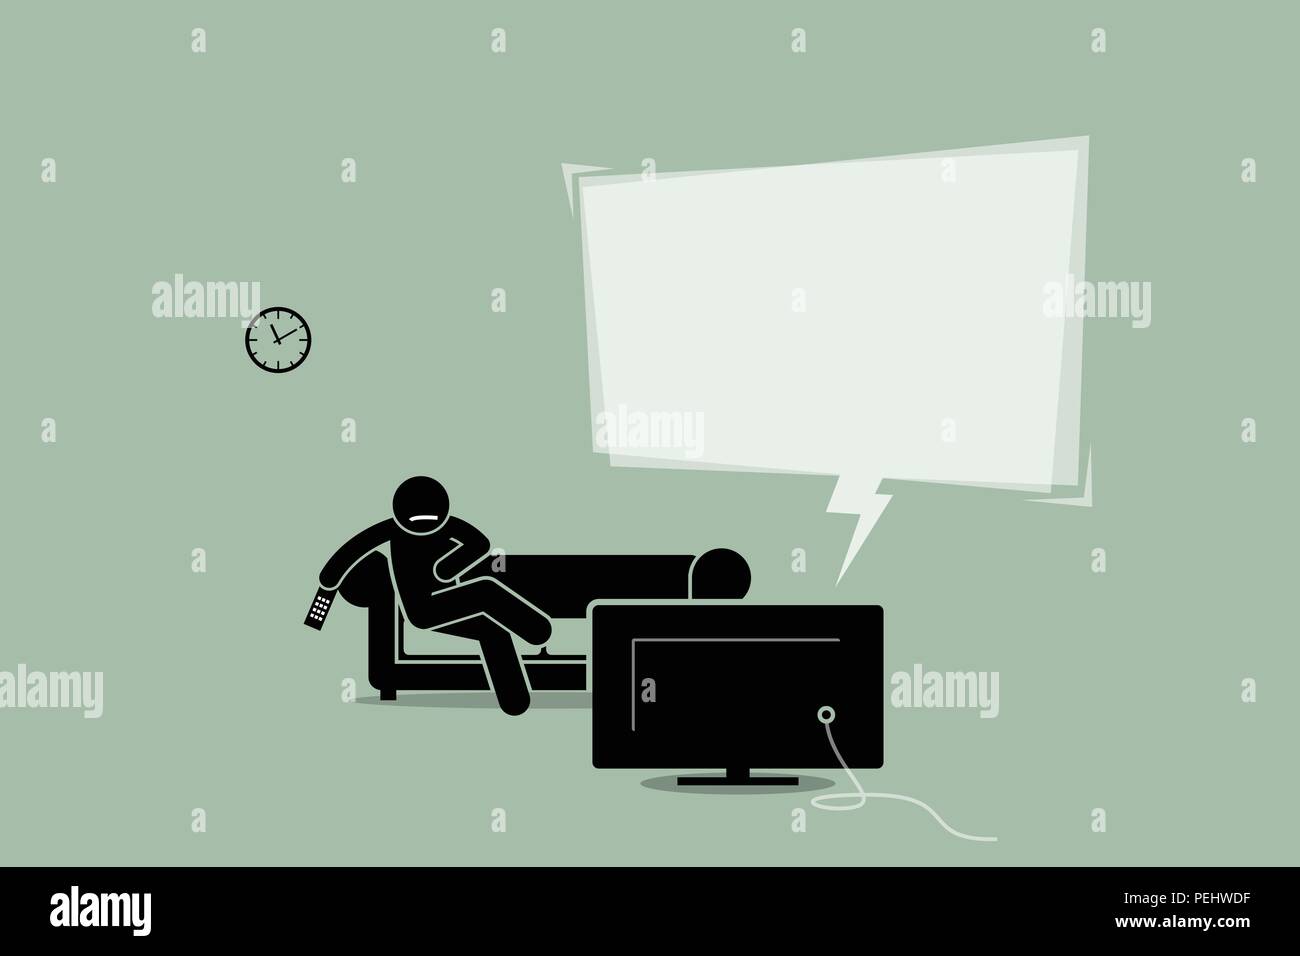 Artwork illustration depicts a person listening to news and information, watching a movie, or simply a TV advertisement. Stock Vector